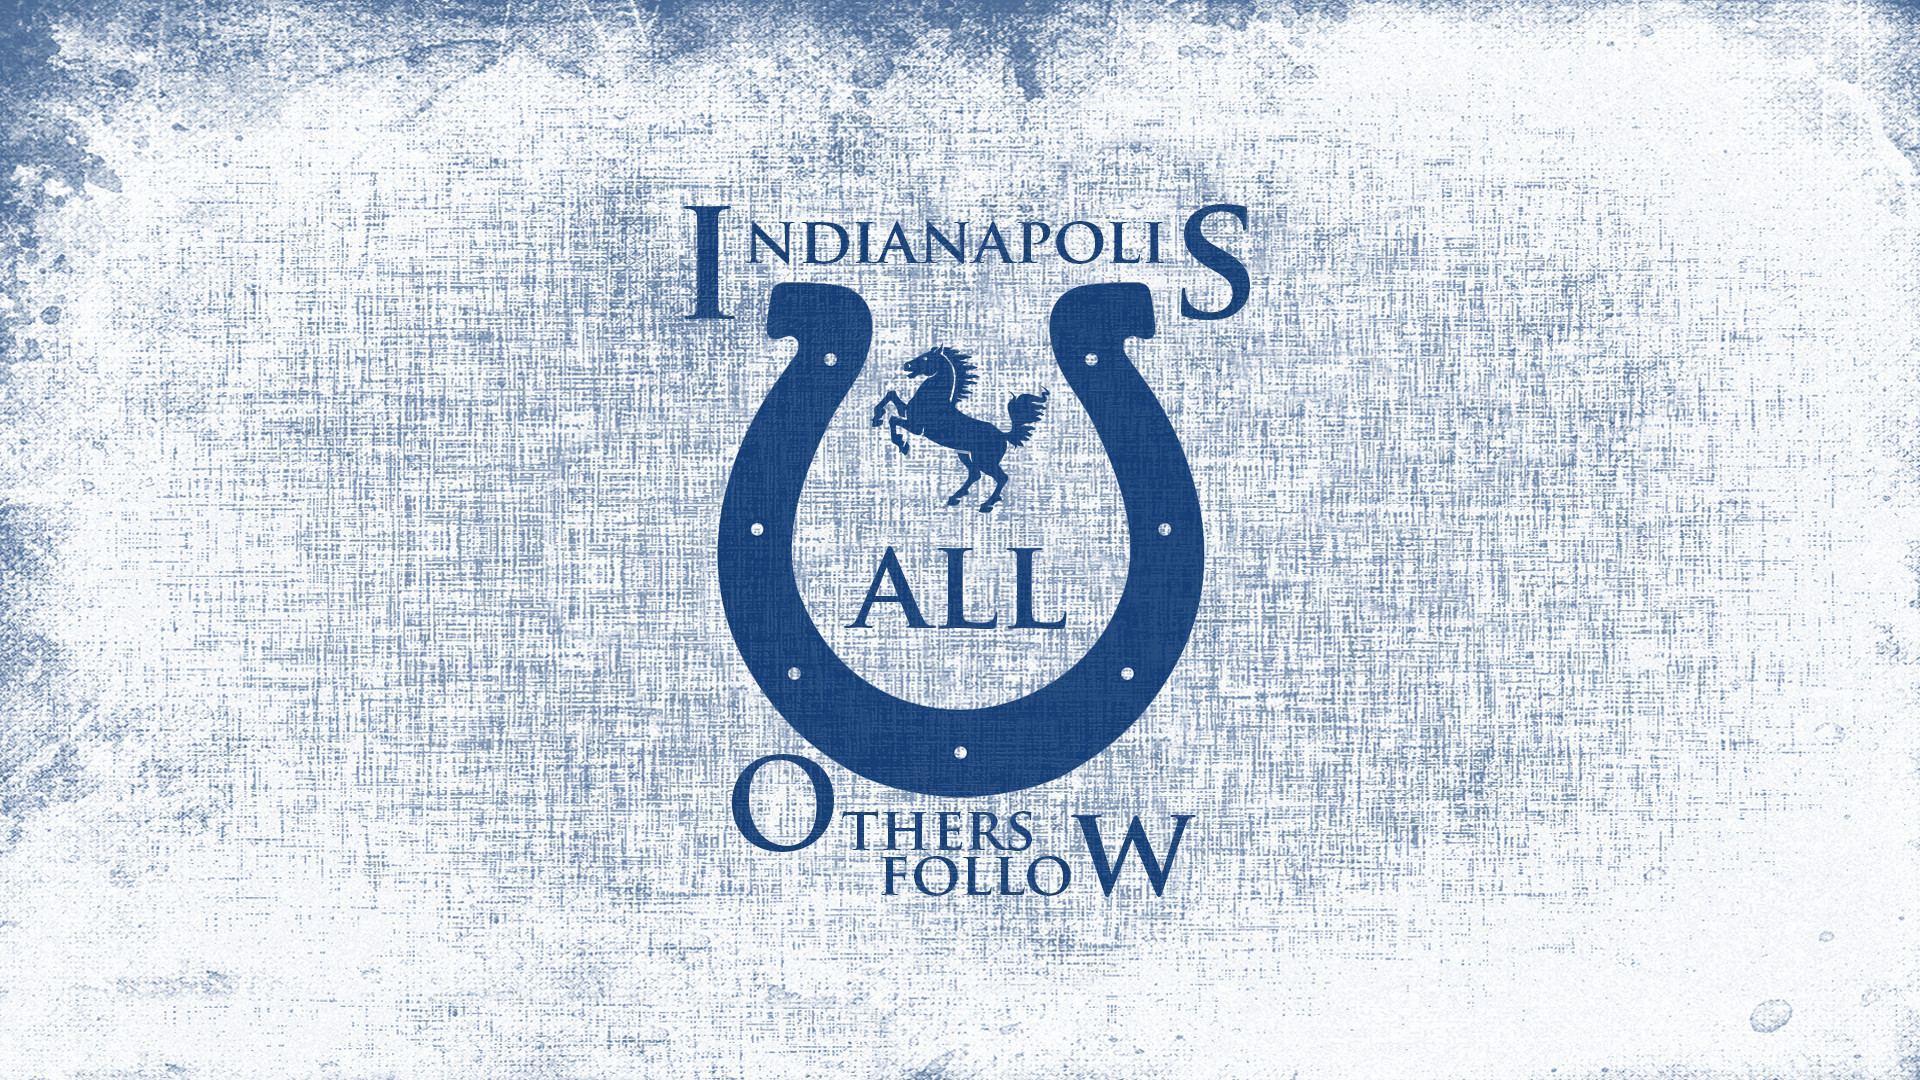 Indianapolis Colts wallpaper HD free download